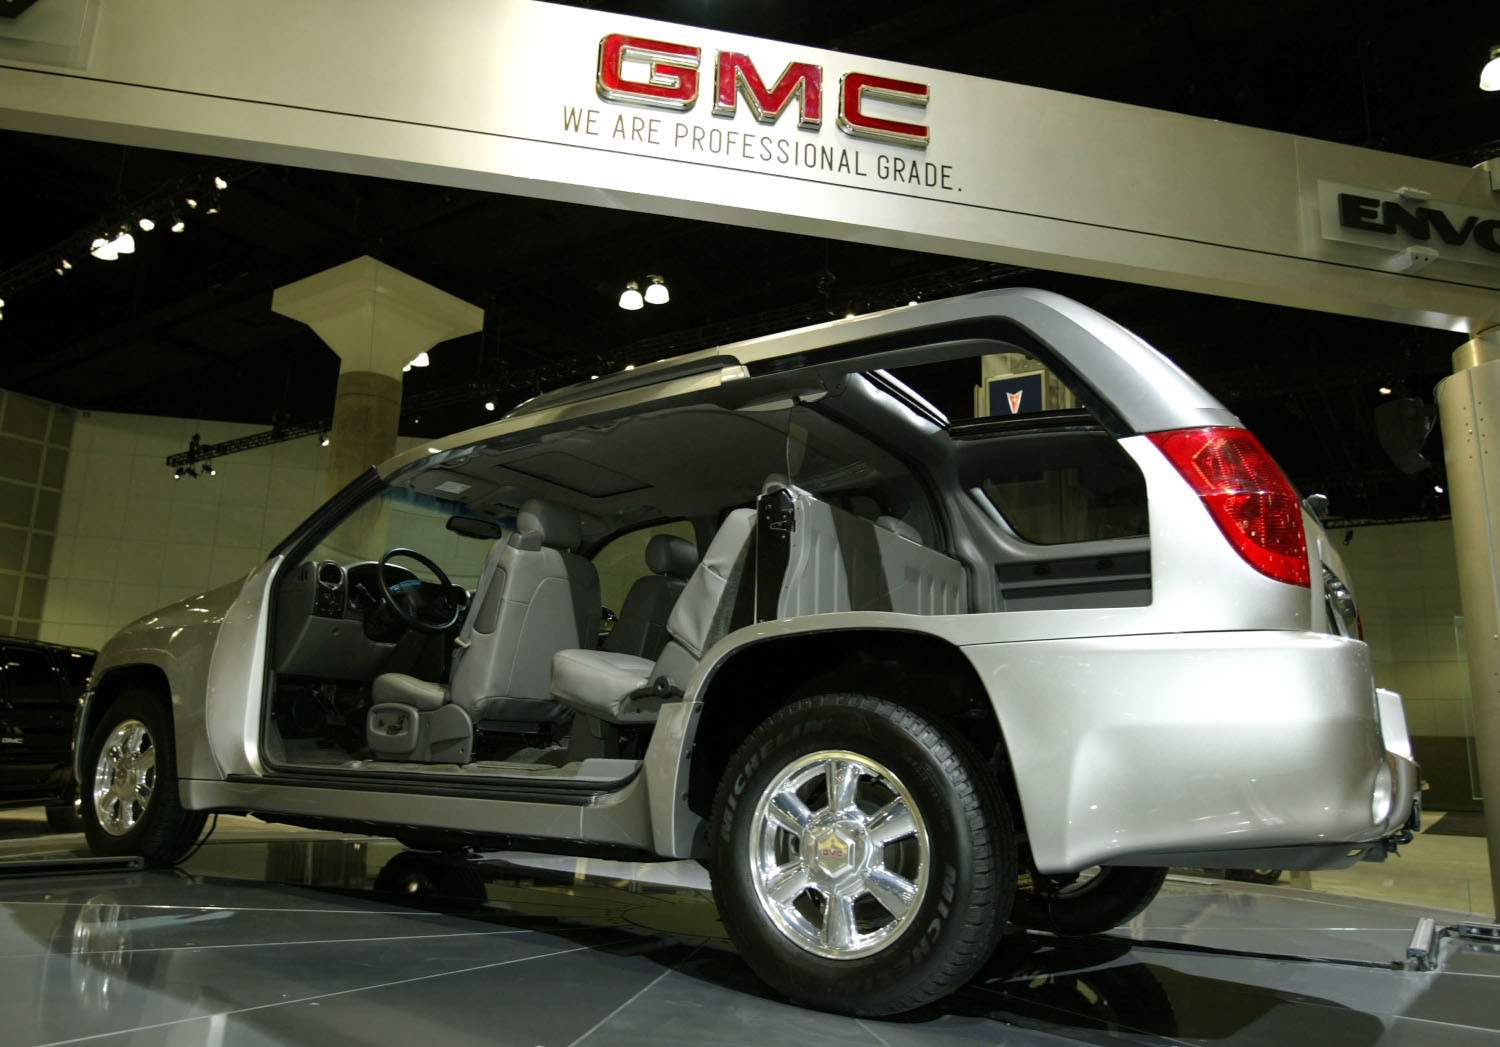 The GMC Envoy XUV seen here was part SUV, part truck